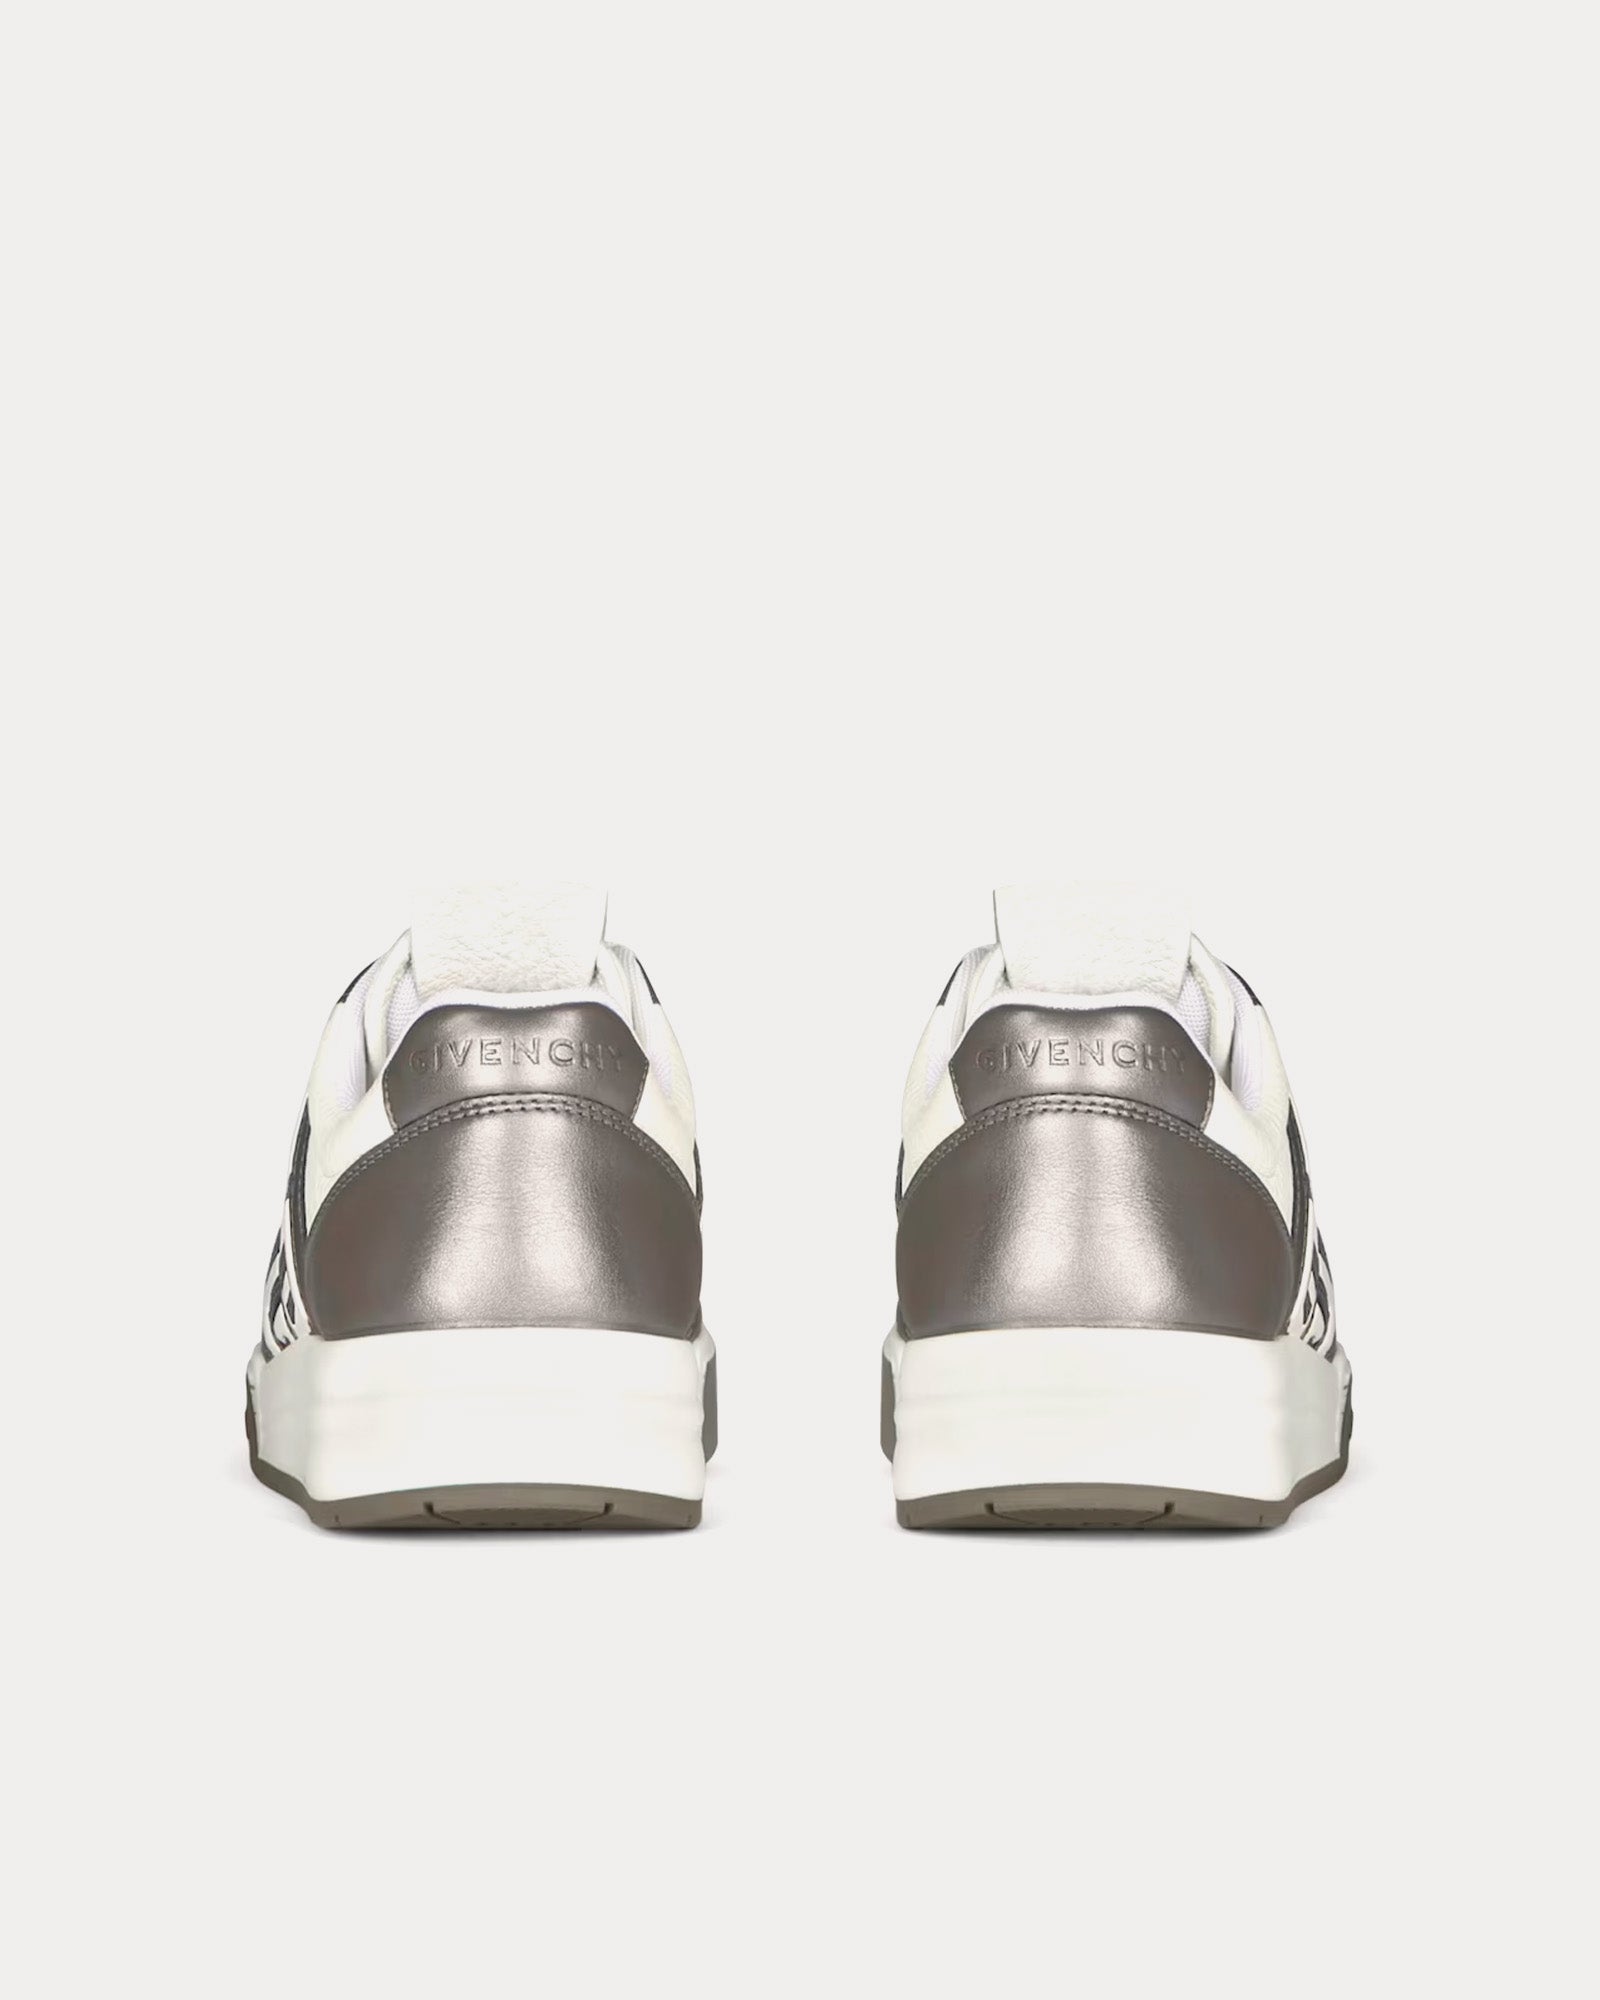 Givenchy - G4 Laminated Leather White / Silvery Low Top Sneakers